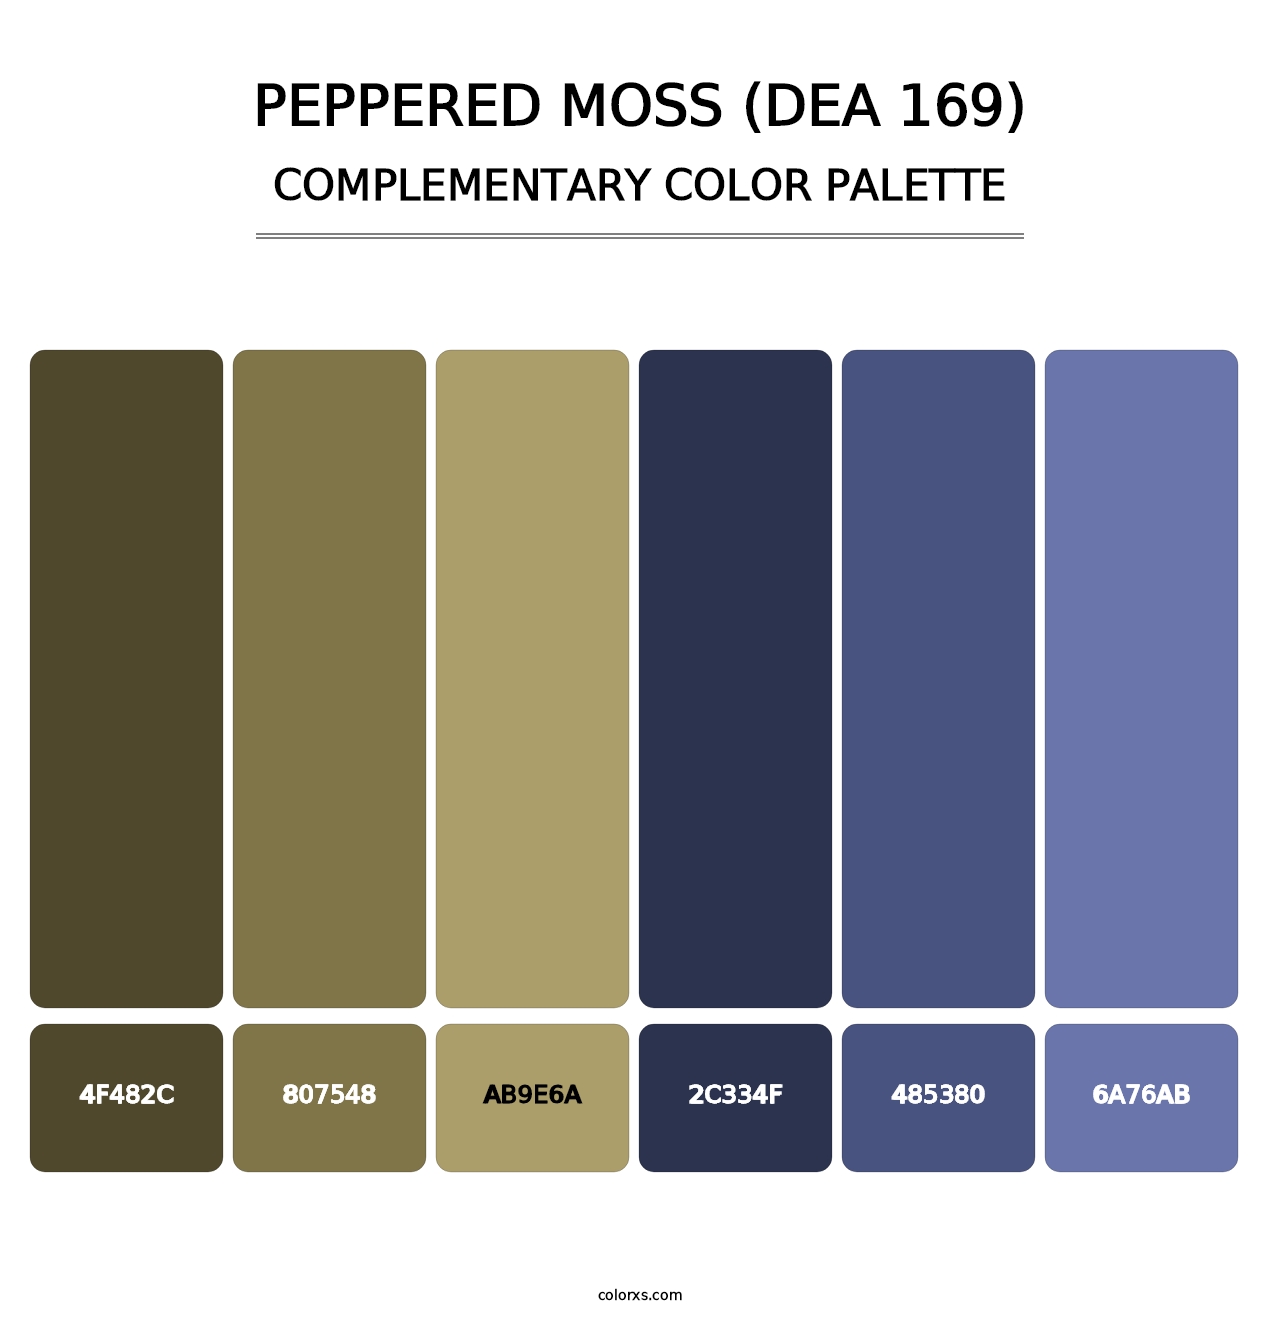 Peppered Moss (DEA 169) - Complementary Color Palette